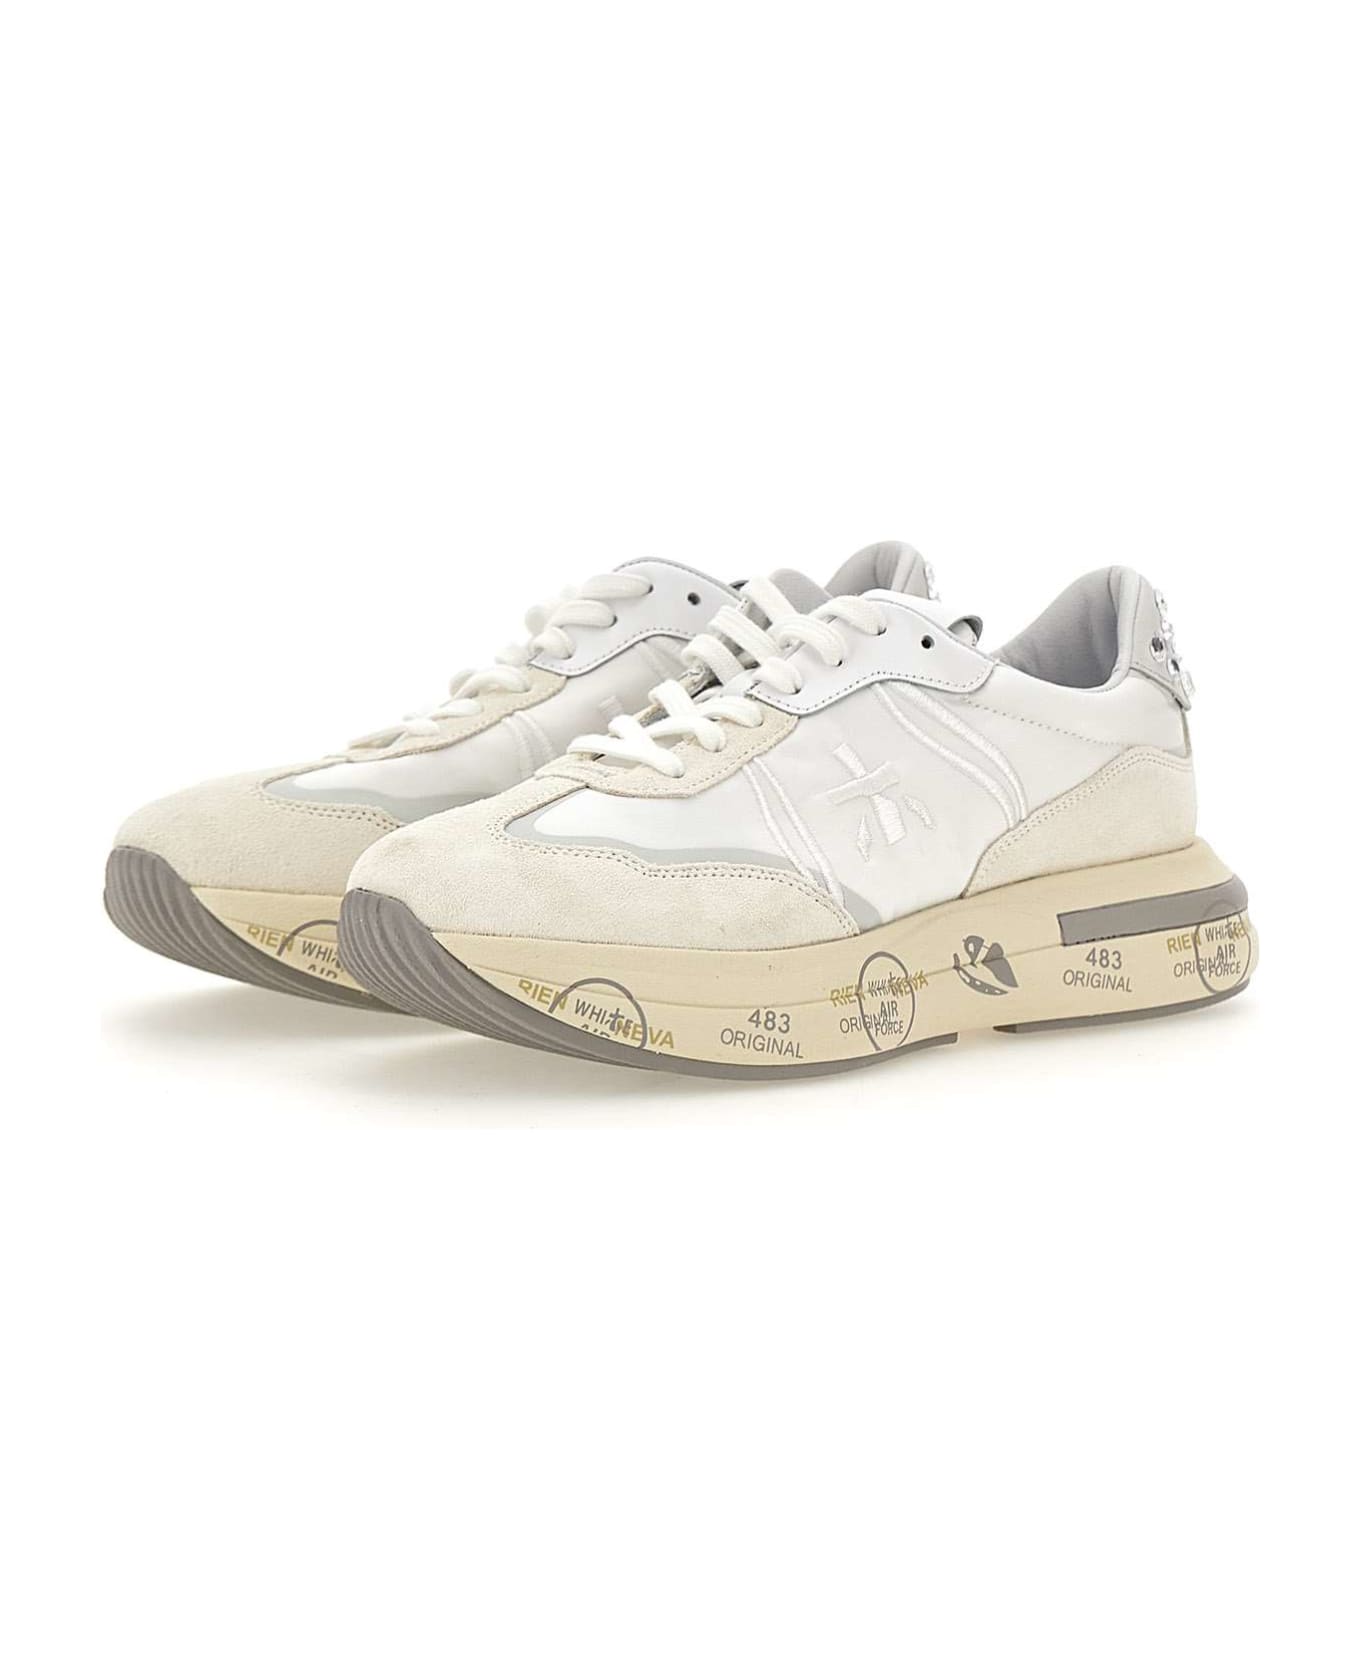 Premiata "cassie 6717" Leather And Fabric Sneakers - WHITE スニーカー